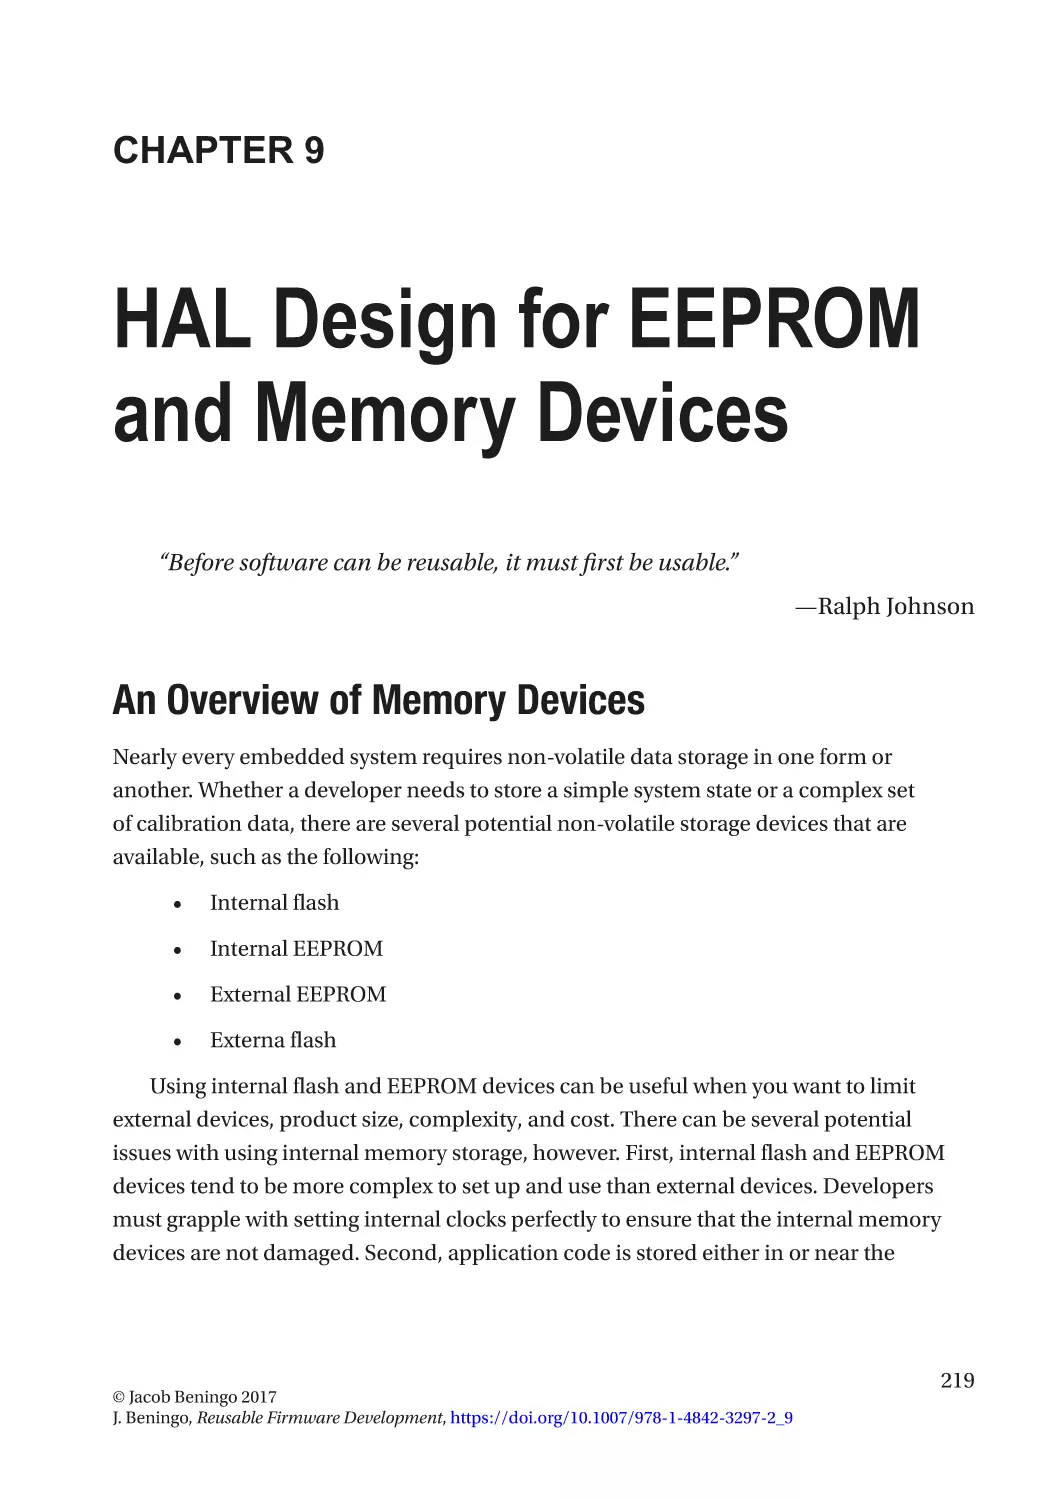 Chapter 9
An Overview of Memory Devices